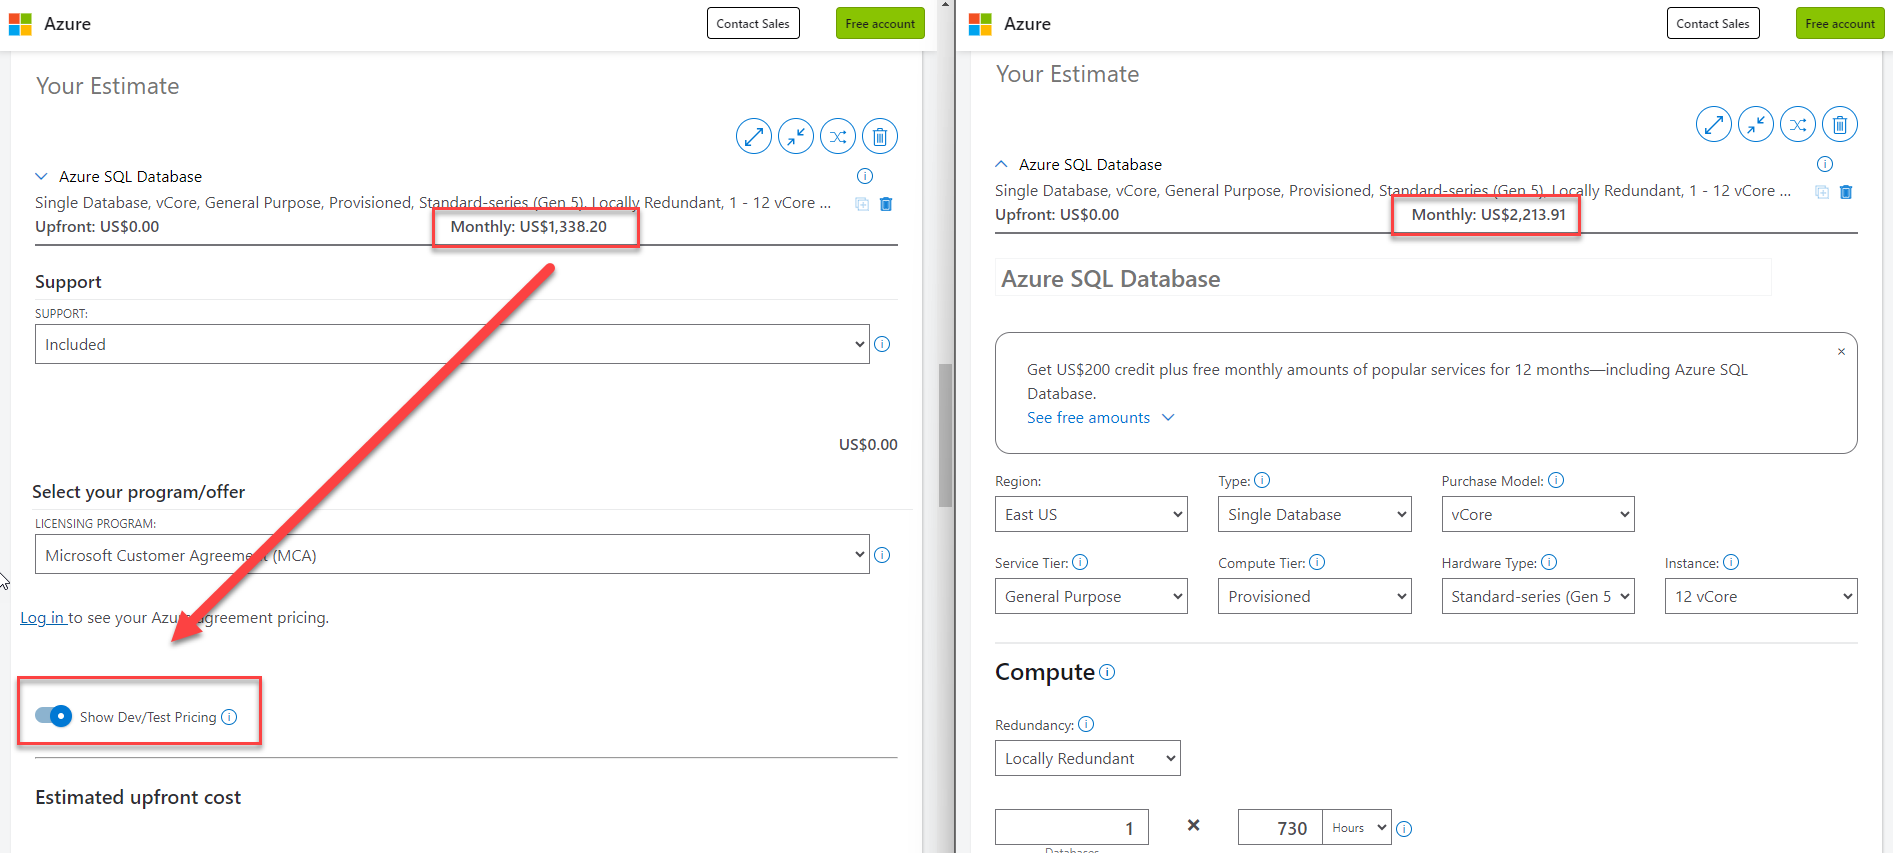 Azure SQL Database Pay-as-you-go and Dev/Test pricing